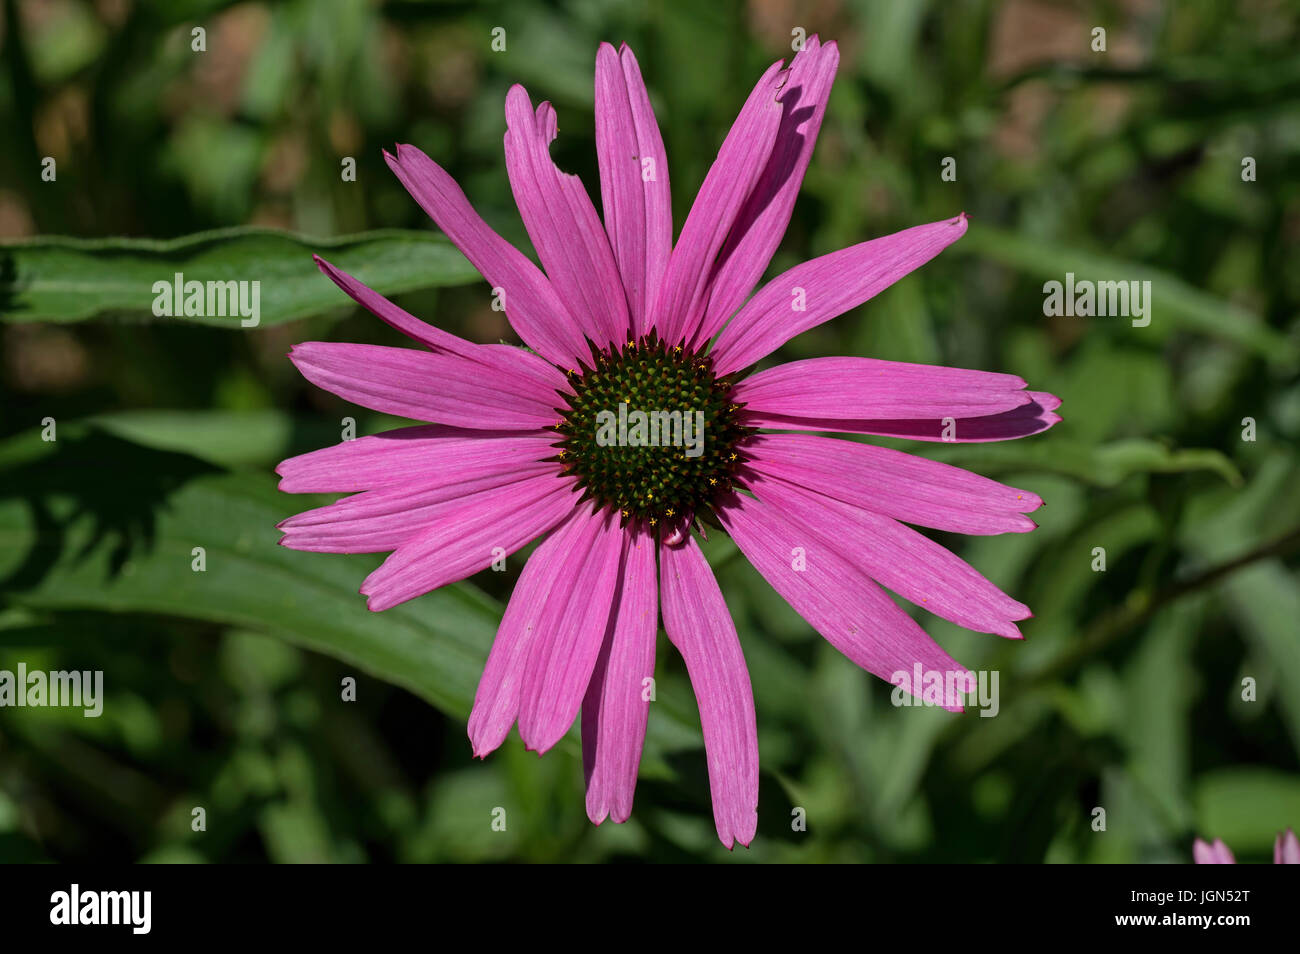 Echinacea in the garden. It is a genus, or group of herbaceous flowering plants in the daisy family. Stock Photo